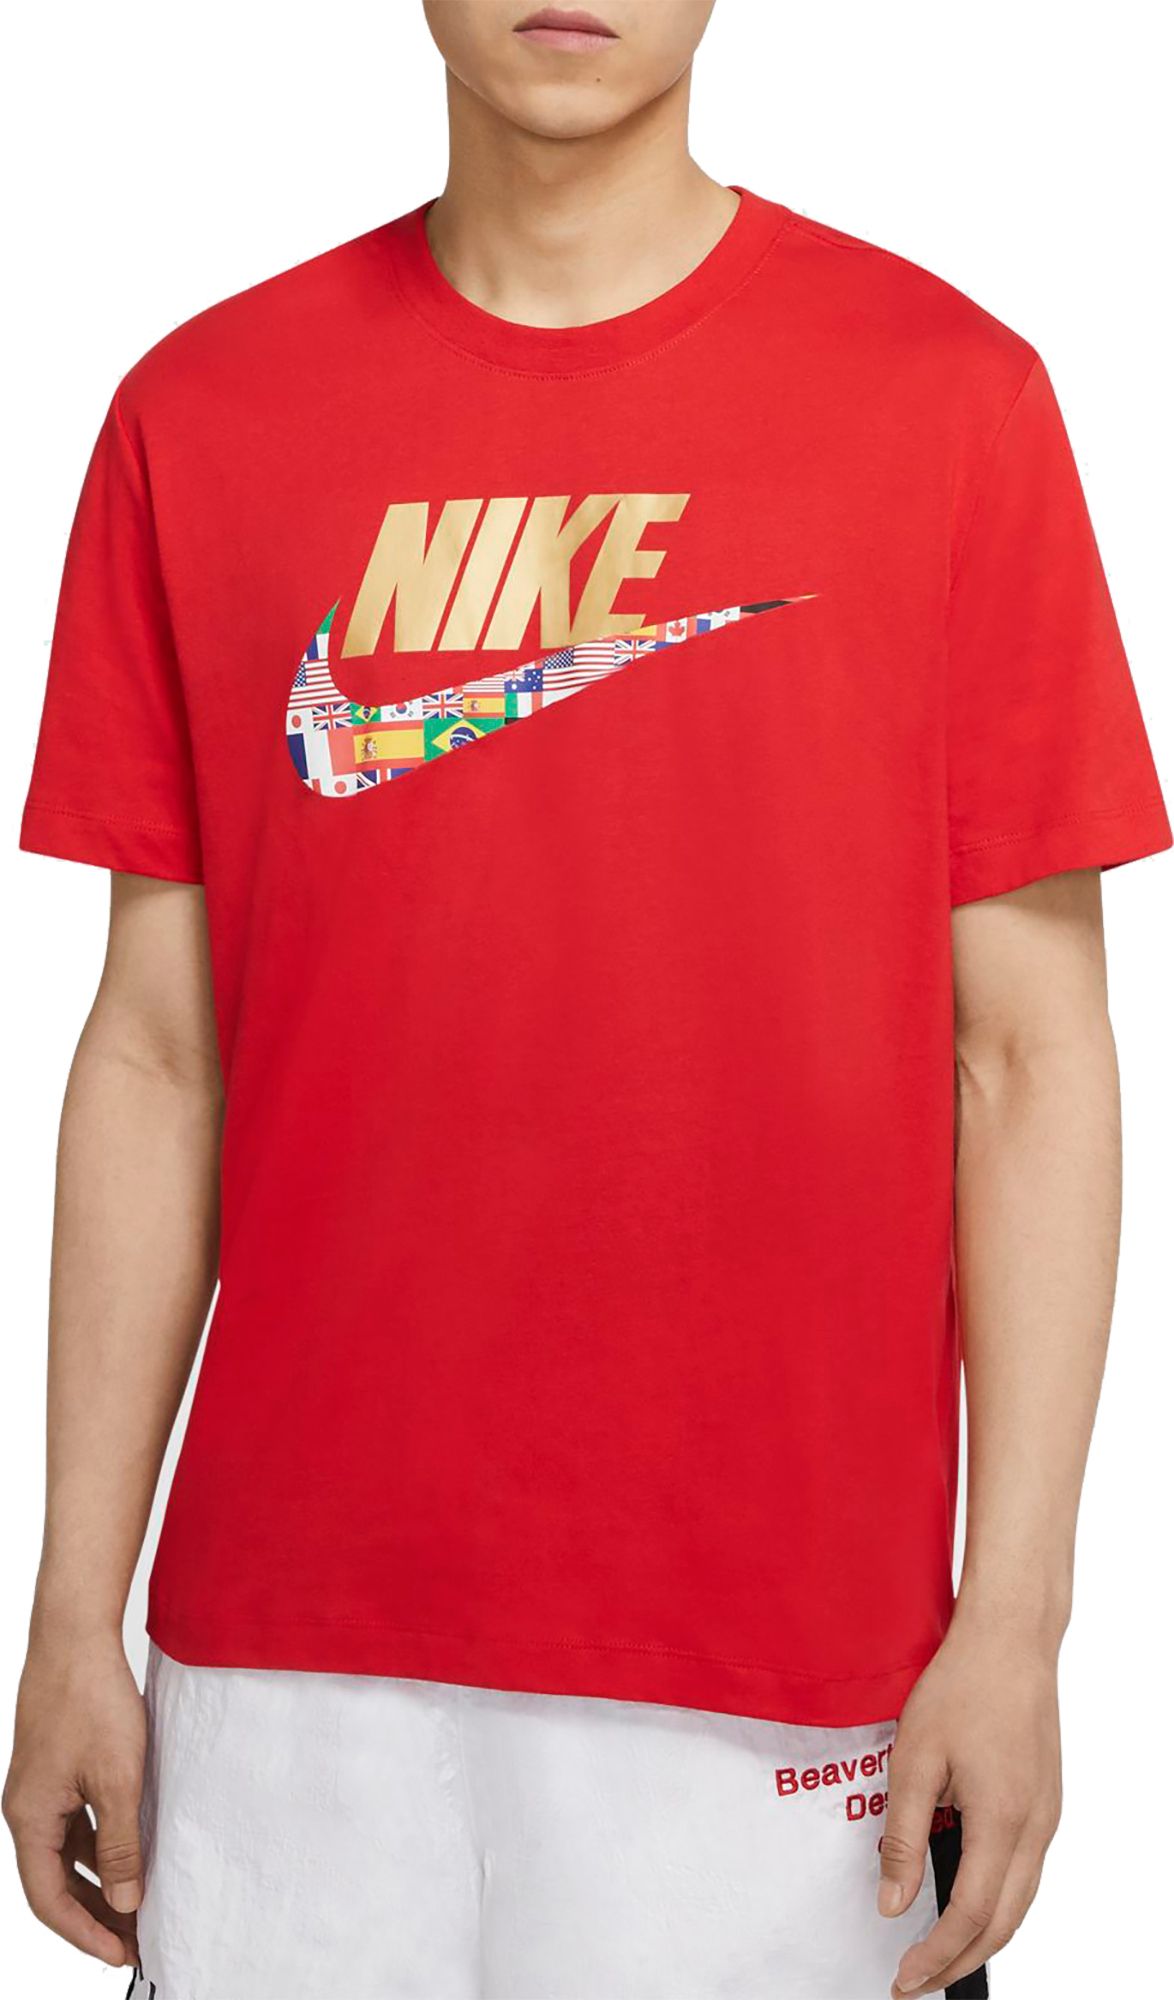 mens white and red nike shirt